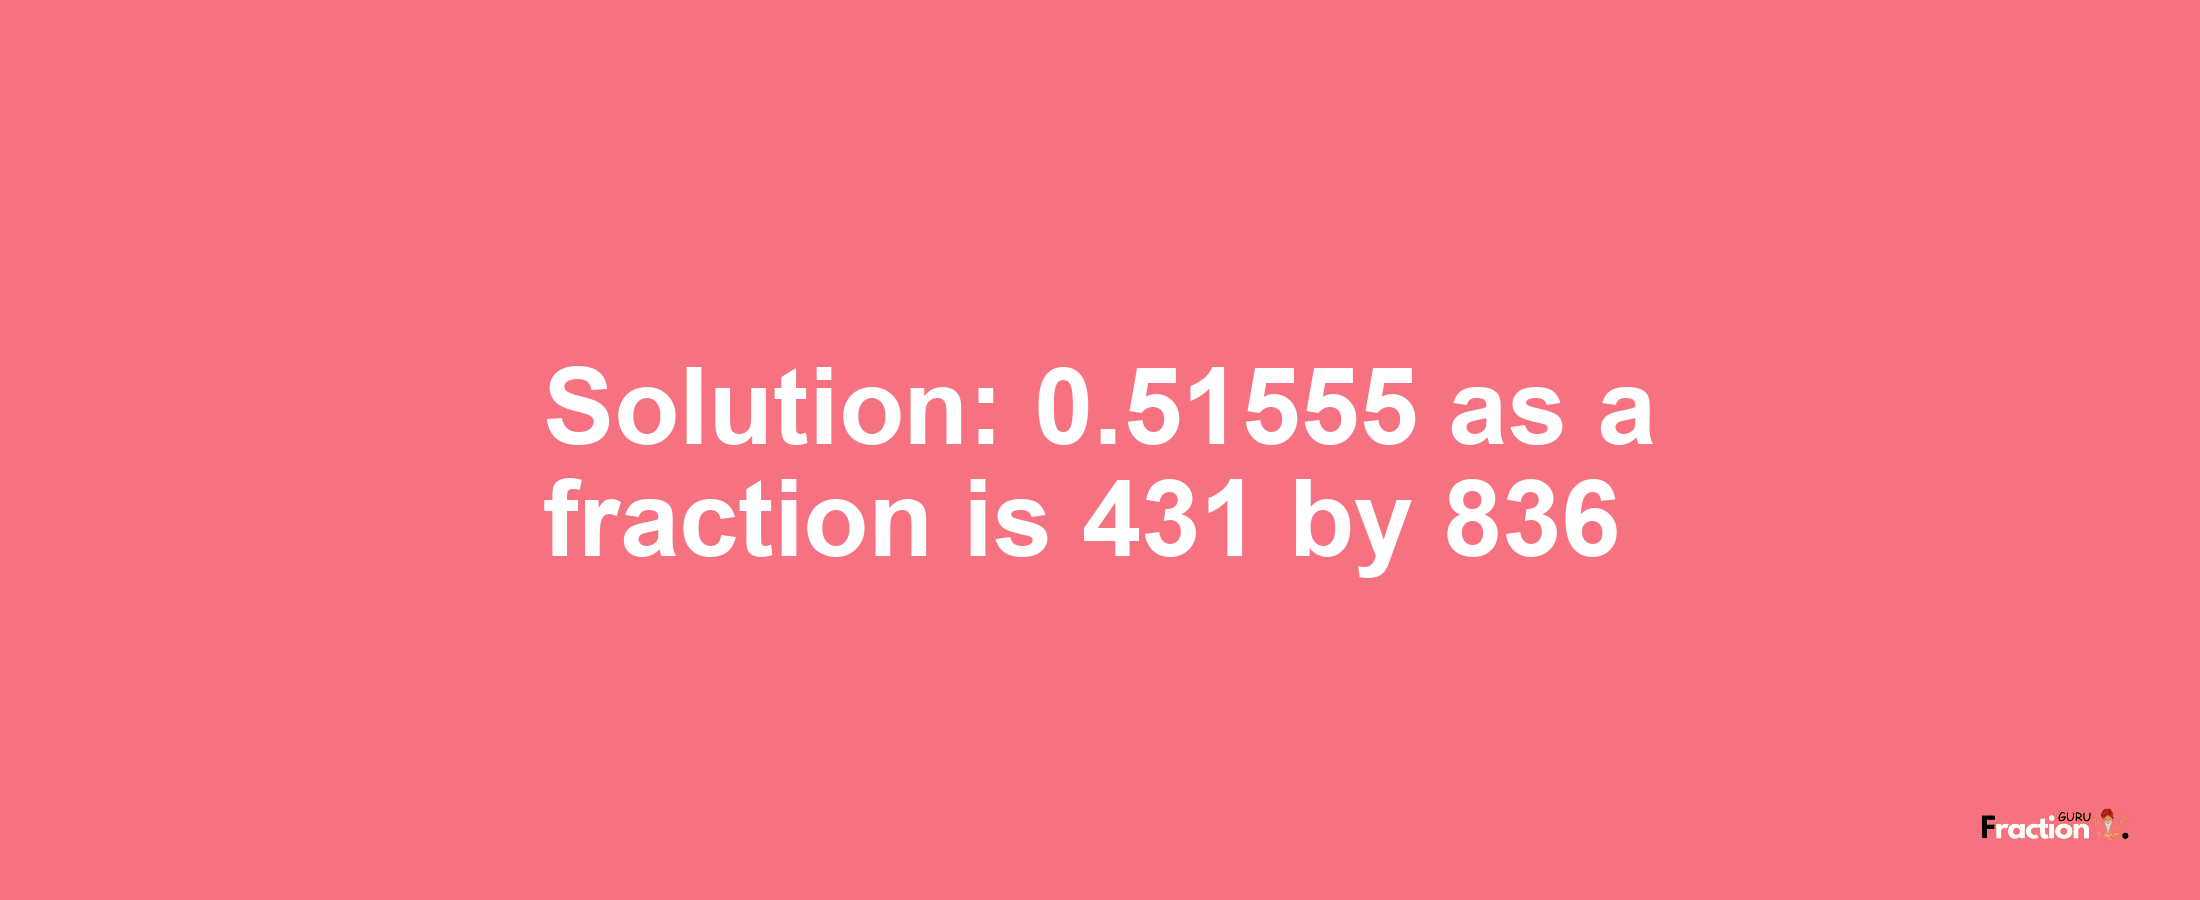 Solution:0.51555 as a fraction is 431/836